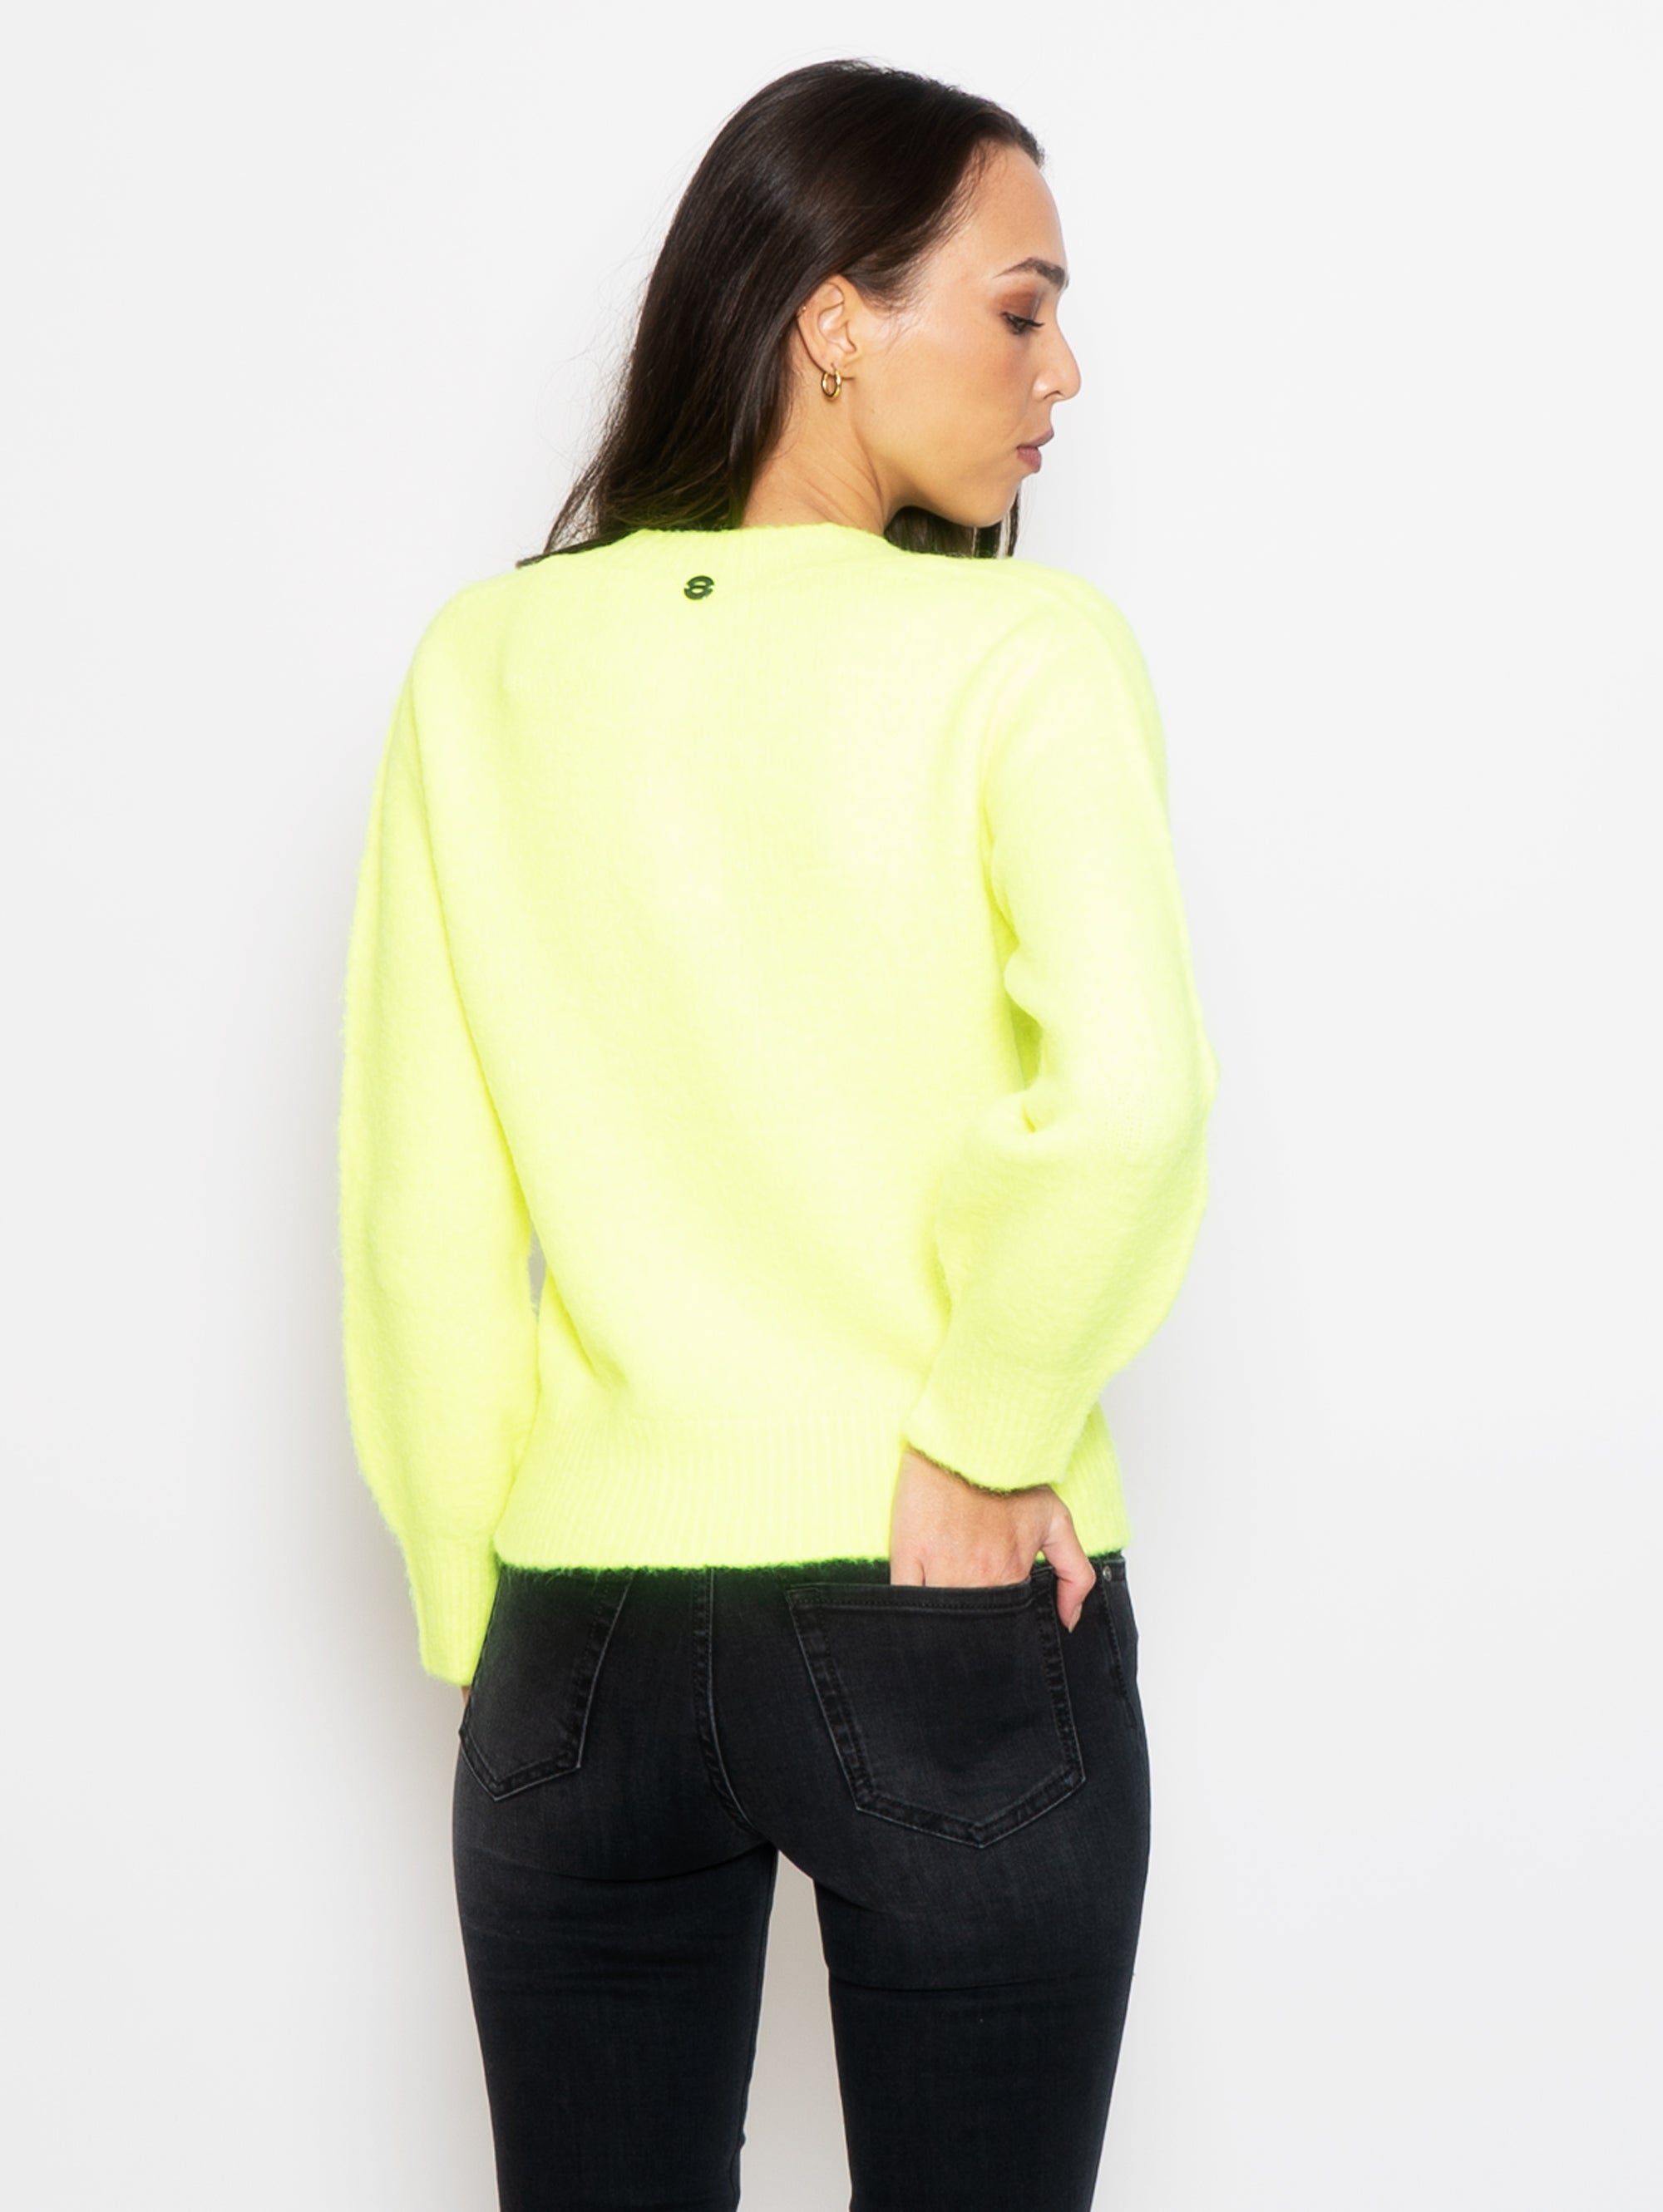 Fluo Yellow Seamless Wool V-Neck Sweater